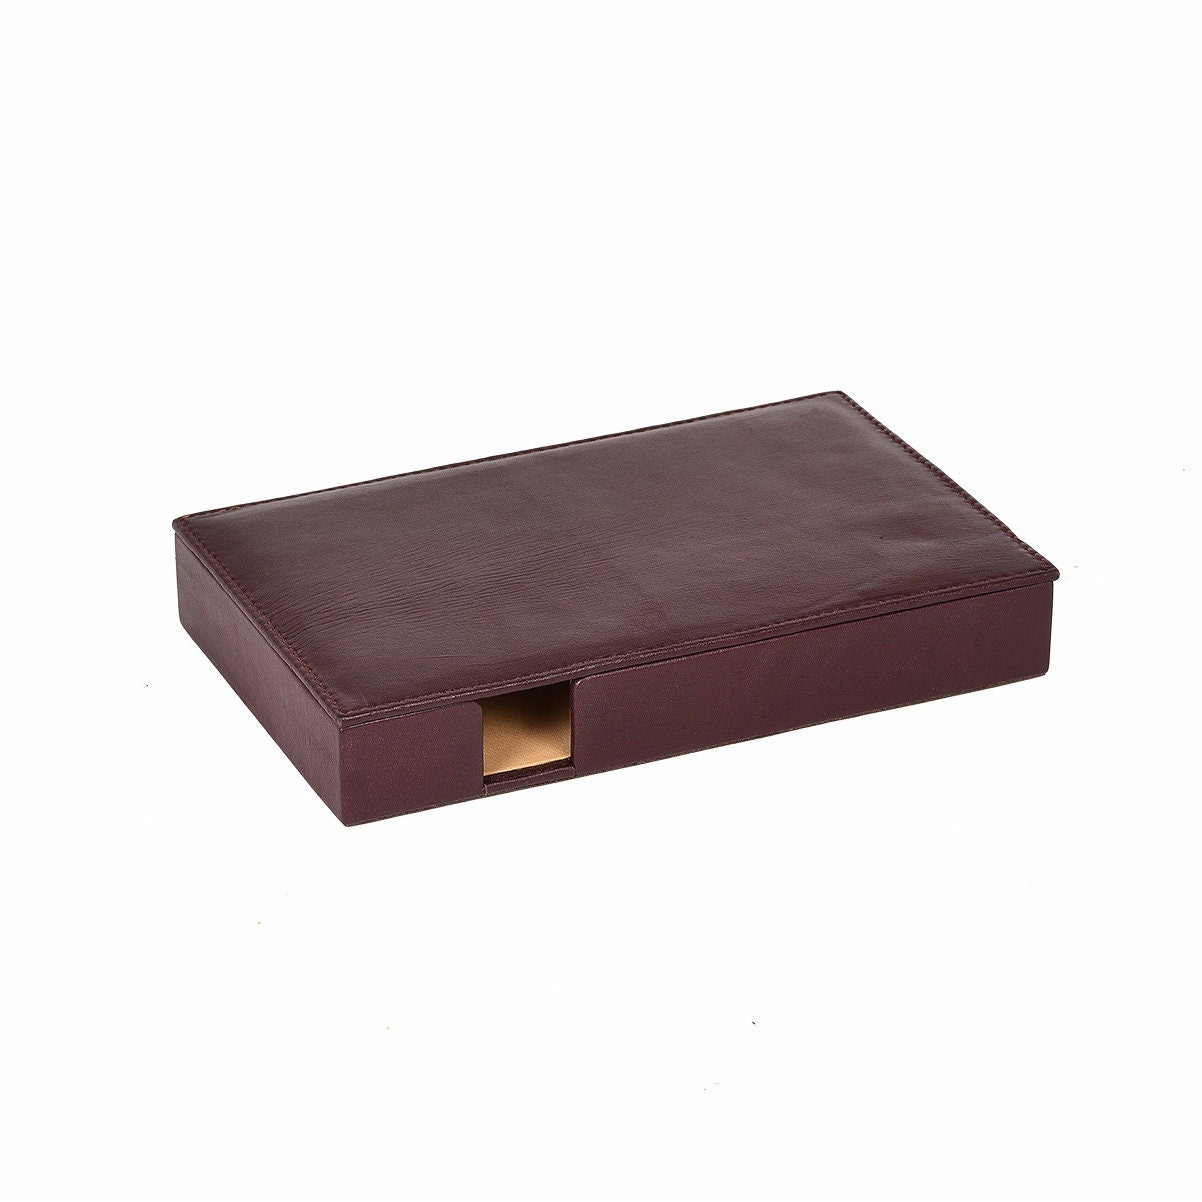 Genuine Leather Desk Organizer Valet Tray Office Decor Accessories Gift for Him Gift for Her